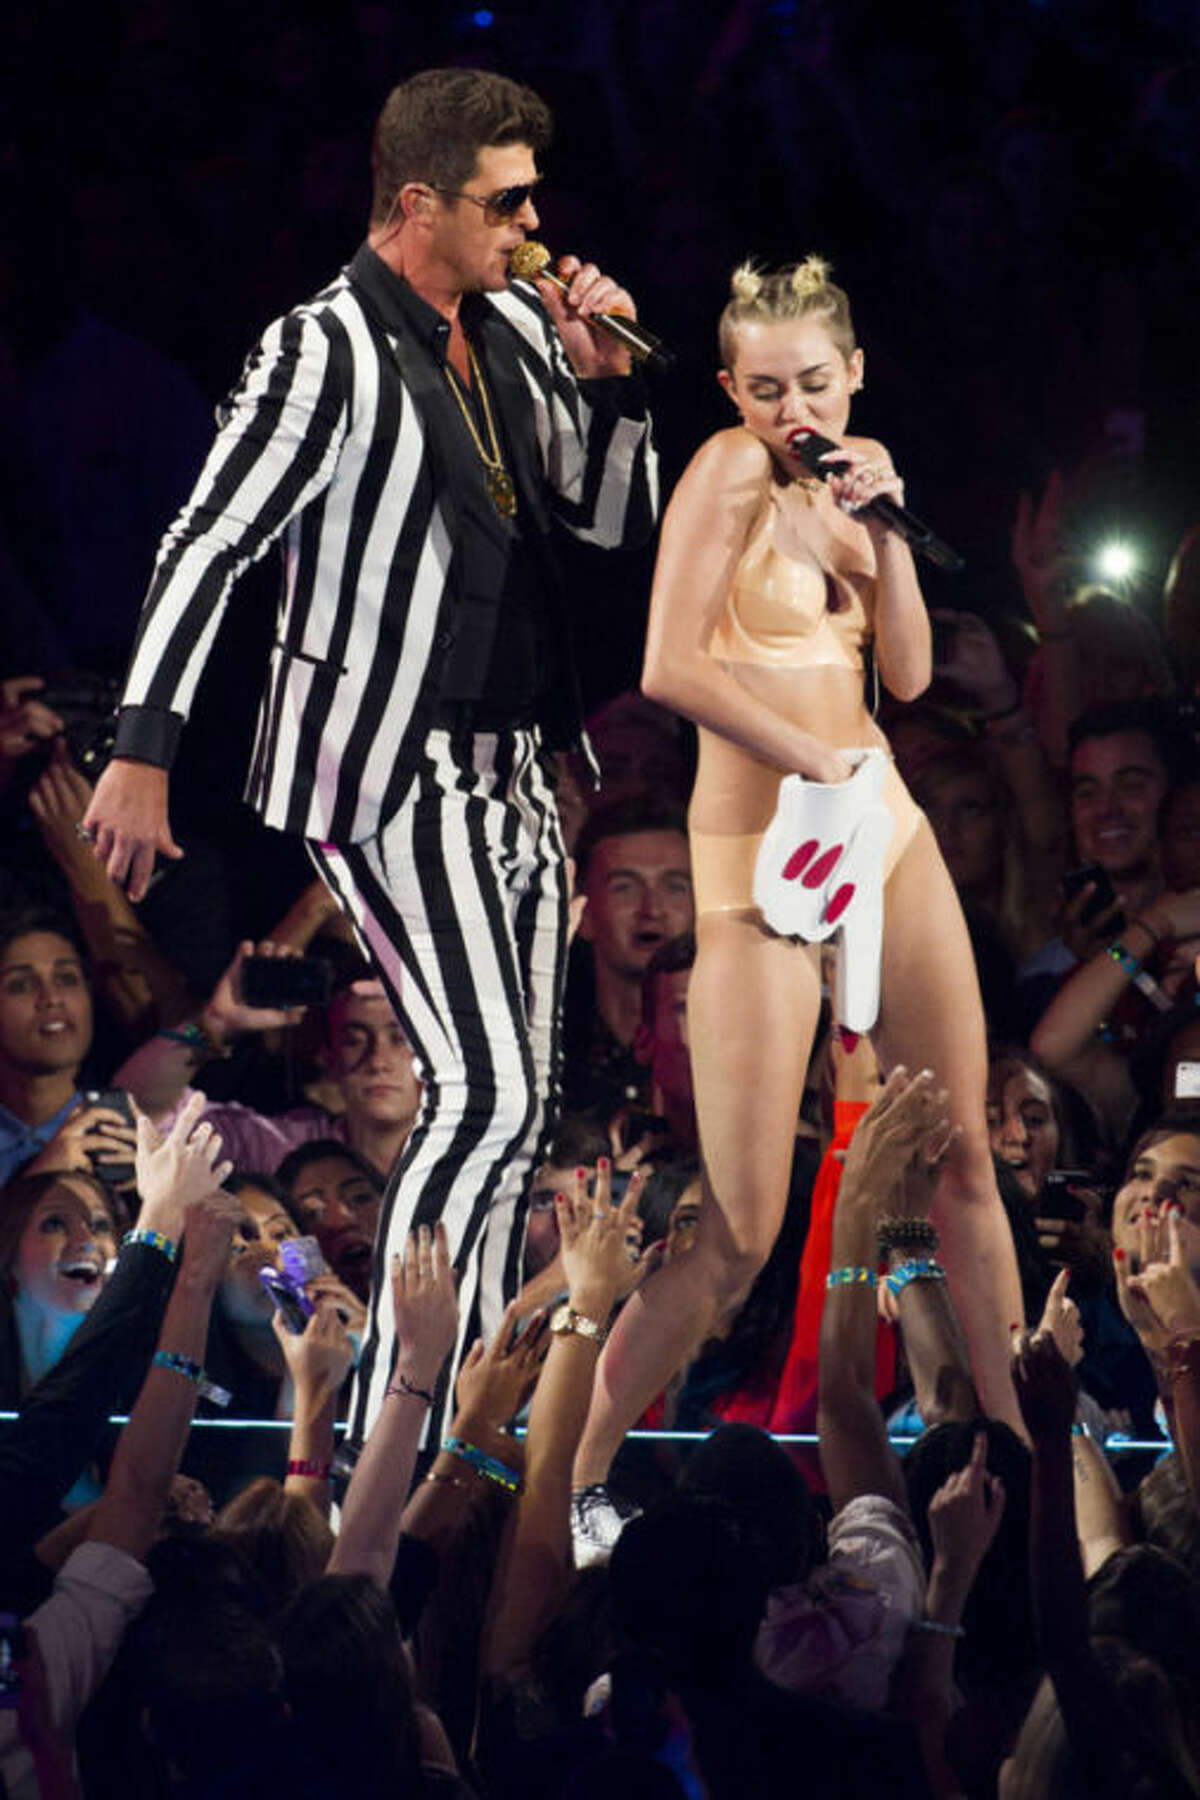 FILE - In this Aug. 25, 2013 file photo, Robin Thicke and Miley Cyrus perform at the MTV Video Music Awards at the Barclays Center in the Brooklyn borough of New York. Cyrus has been making noise for months now: It started with her edgy We Cant Stop party-style music video, but she hit new heights with her eye-popping MTV Video Music Awards performance. (Photo by Charles Sykes/Invision/AP, File)